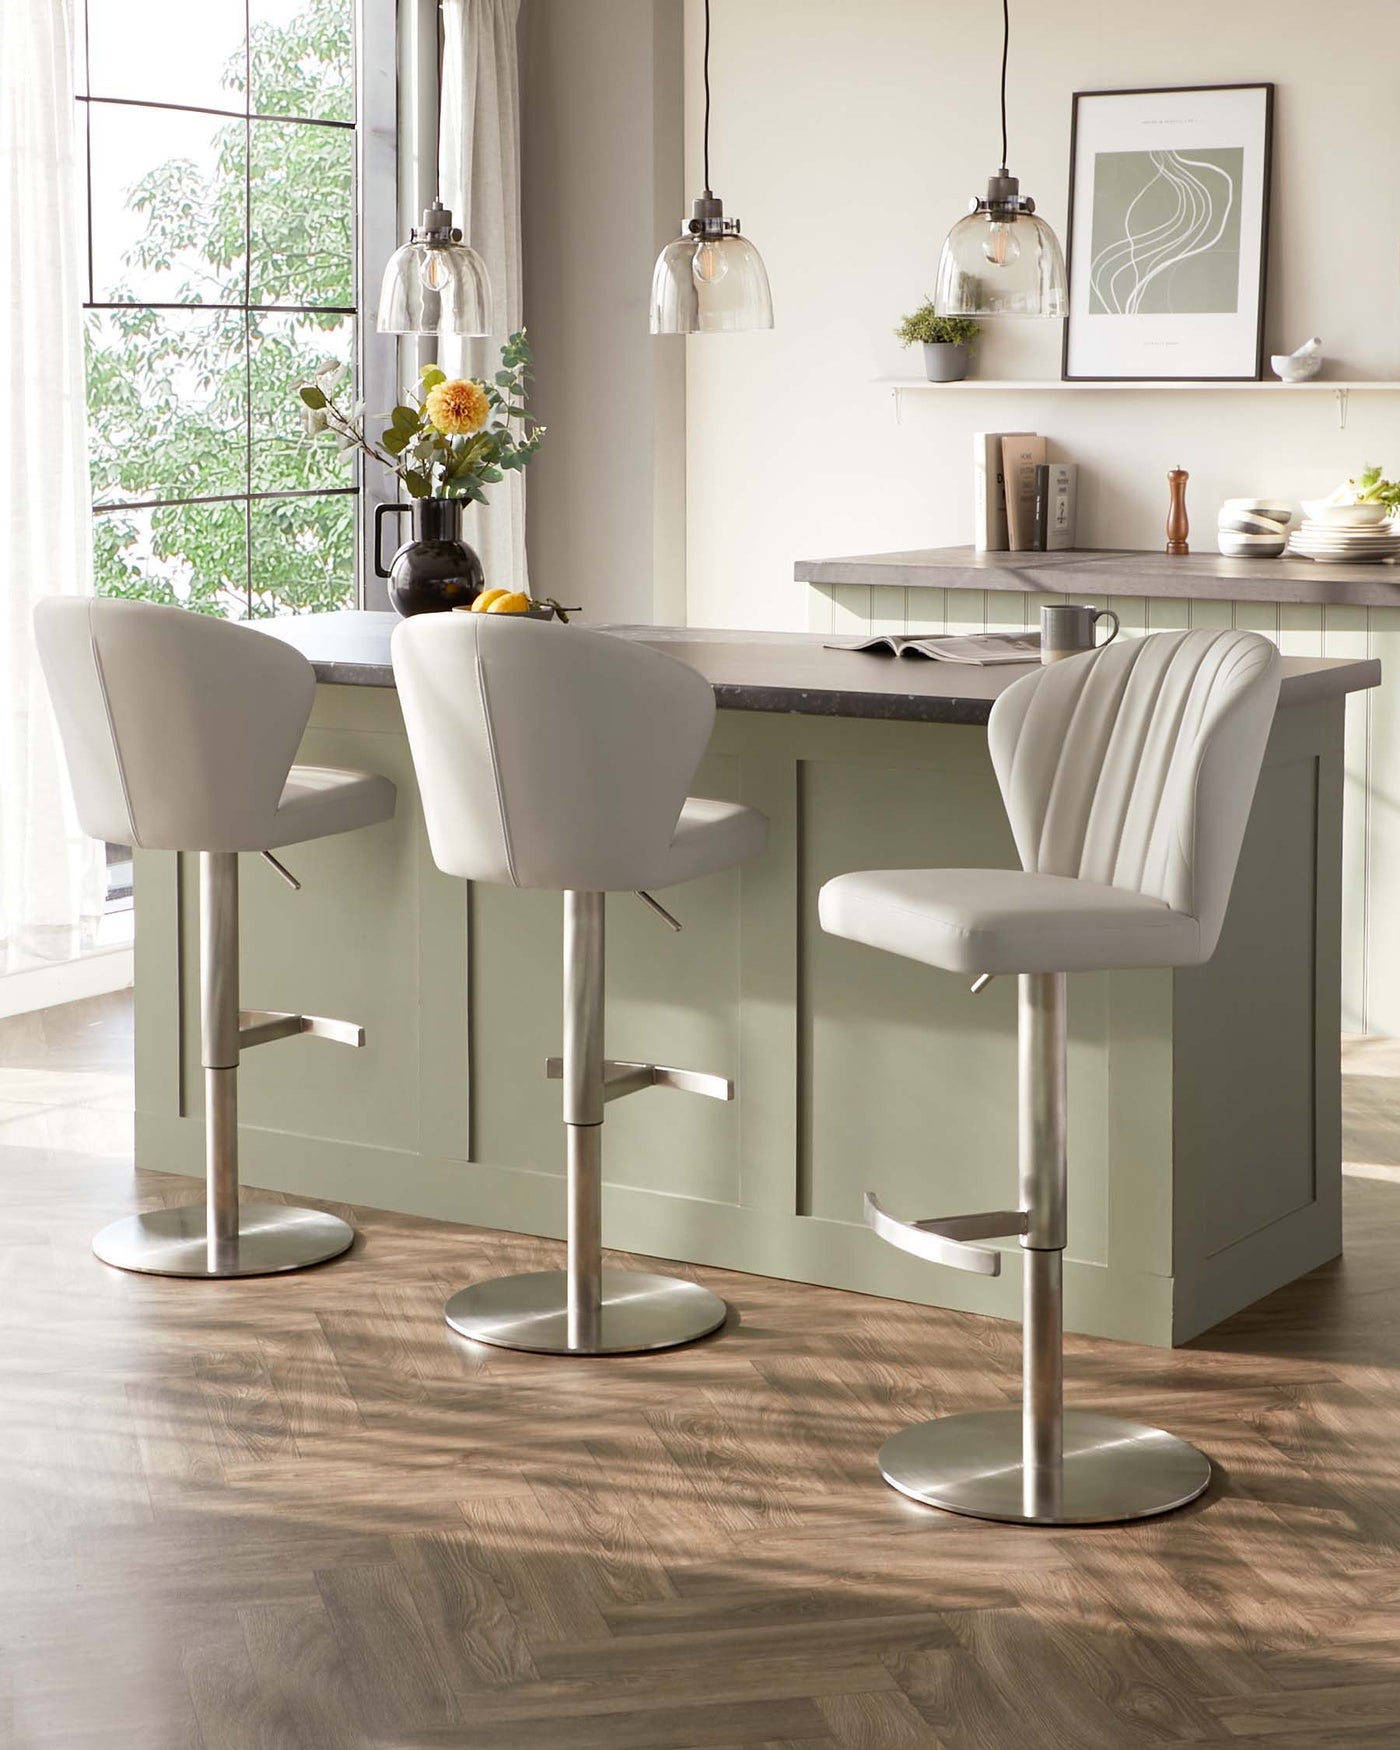 Three modern adjustable-height bar stools with white padded seats and backrests, fluted design detailing, and circular chrome bases.